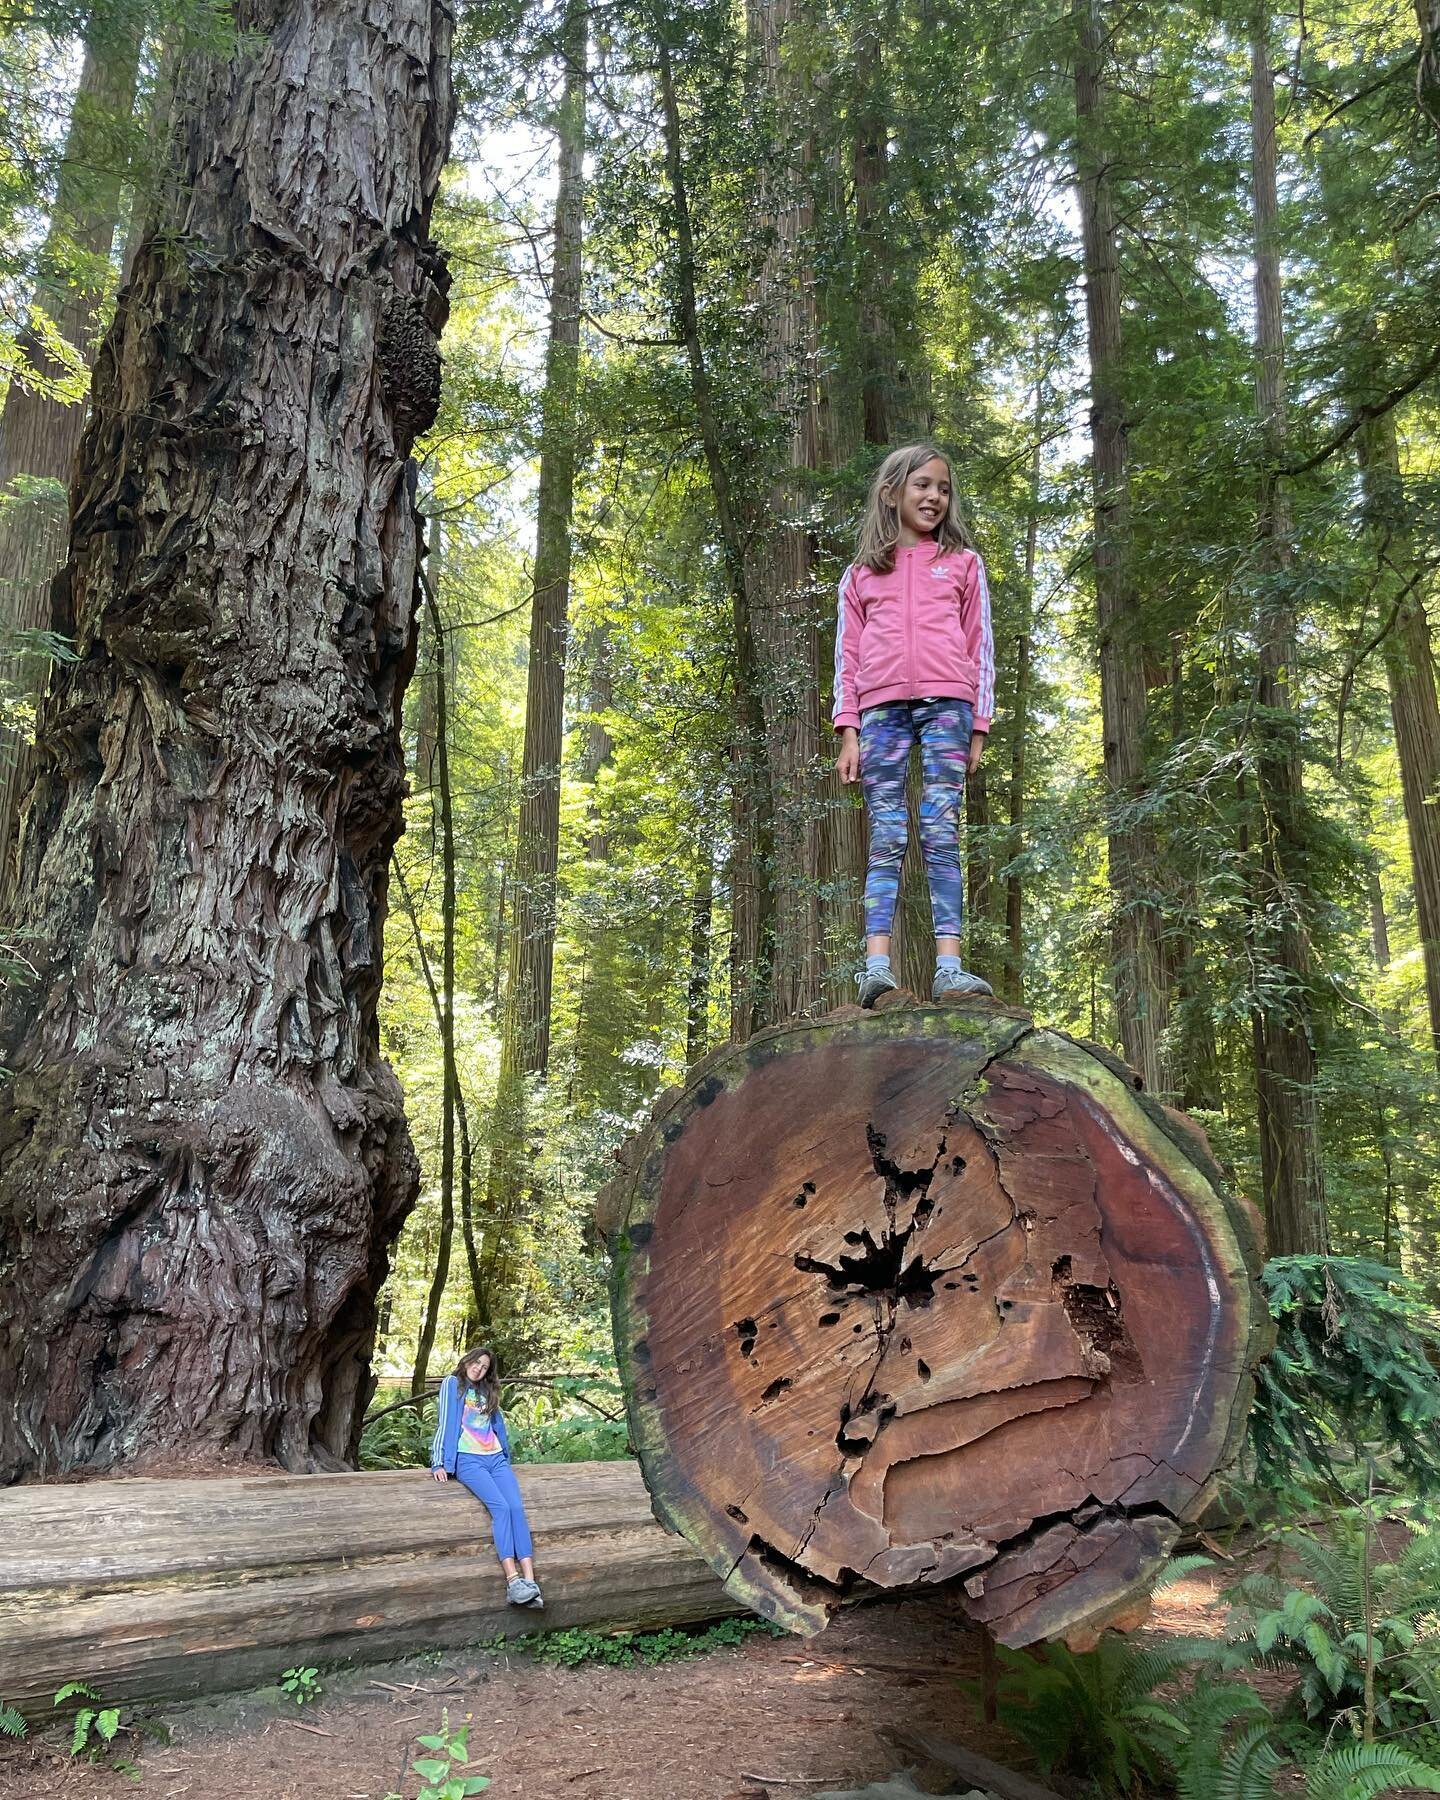 Tall trees! Have you been to Redwood National &amp; State Parks? 

#parks #findyourpark
#nps #npca #nationalpark #usnationalparks #nationalparkservice #outdoors #optoutside #ustravel #americathebeautiful
#camping #hiking #nature  #roadtrip #shotoniph